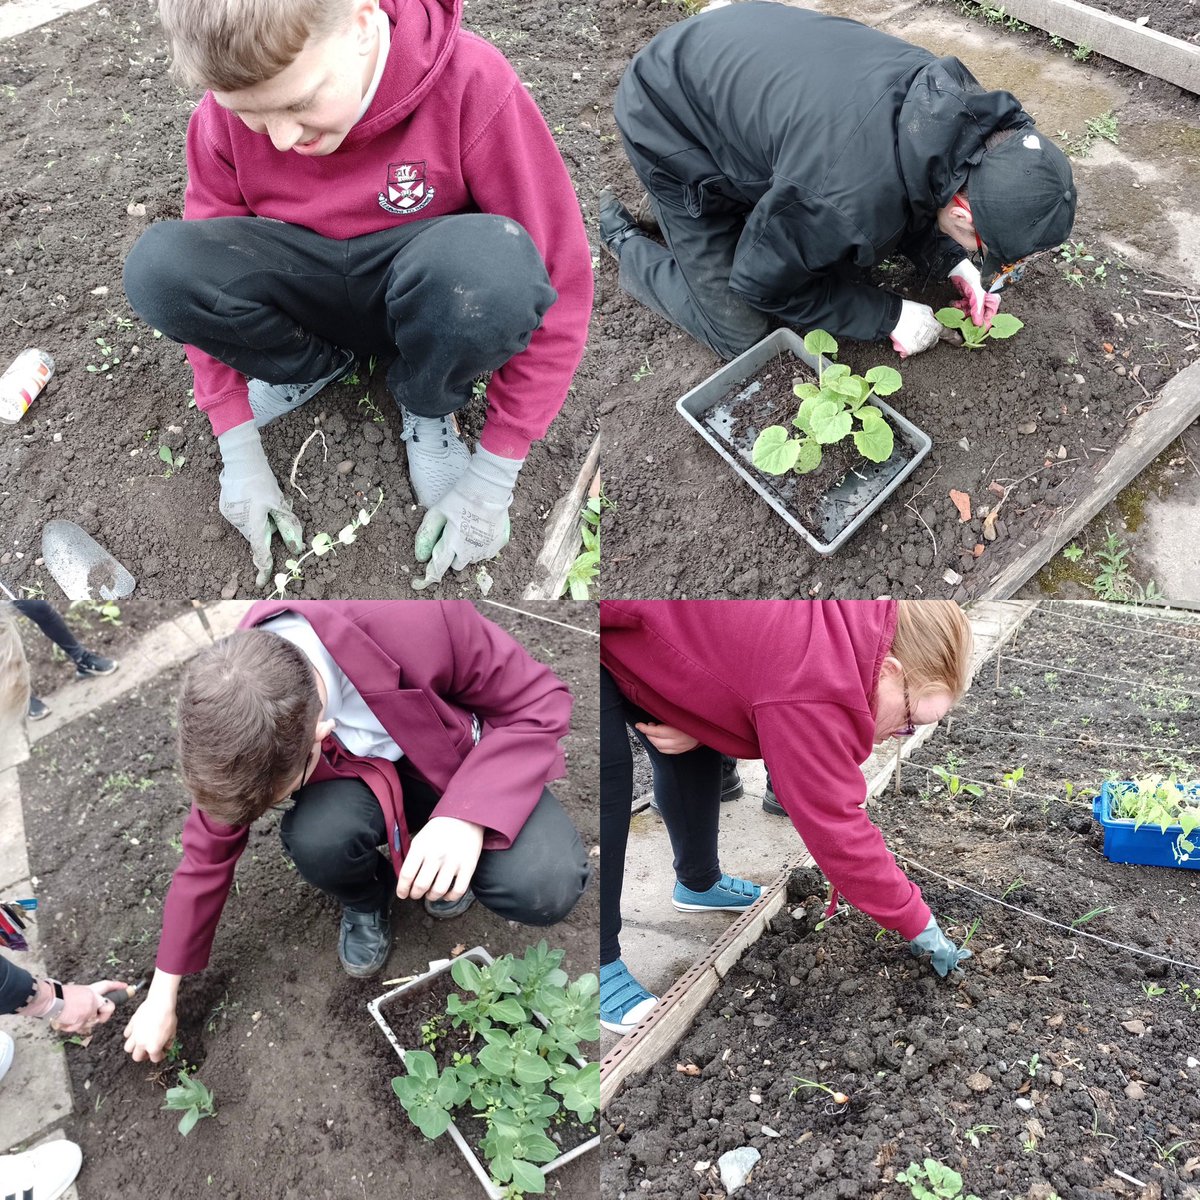 We loved spending some time at our allotment today planting and weeding. It’s been tricky to get down due to all the rain but the plants aren’t complaining 🌱 @AlloaAcademy #wearegrowing #planting #teamwork